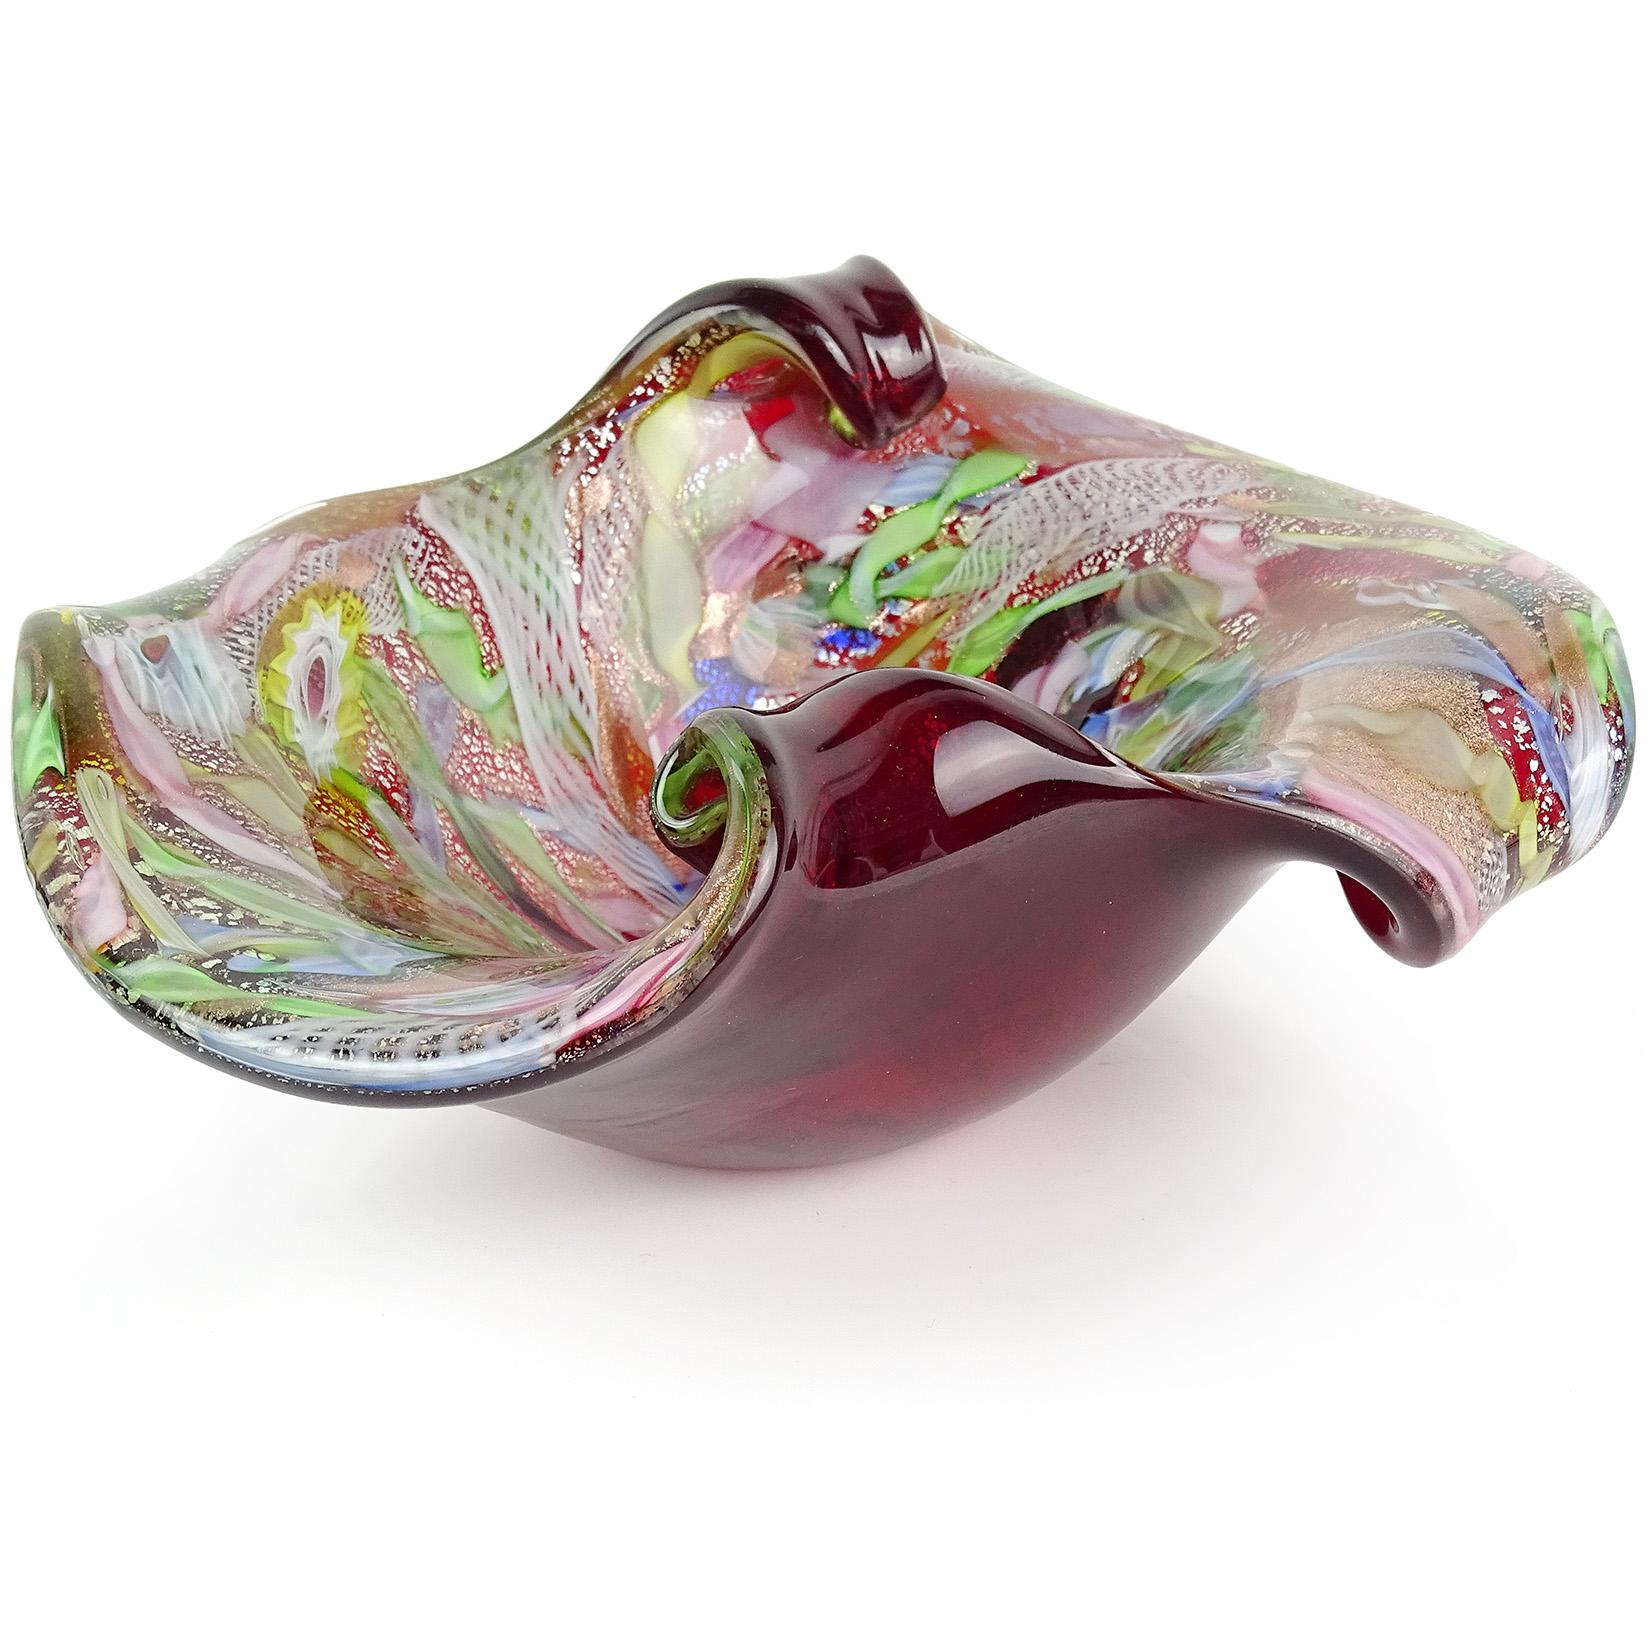 Beautiful Murano hand blown red, silver flecks, copper aventurine, millefiori flower murrines and twisted ribbons Italian art glass center bowl. Documented to the A.Ve.M. (Arte Vetraria Muranese) company. The bowl has a scissor cut rim, with the